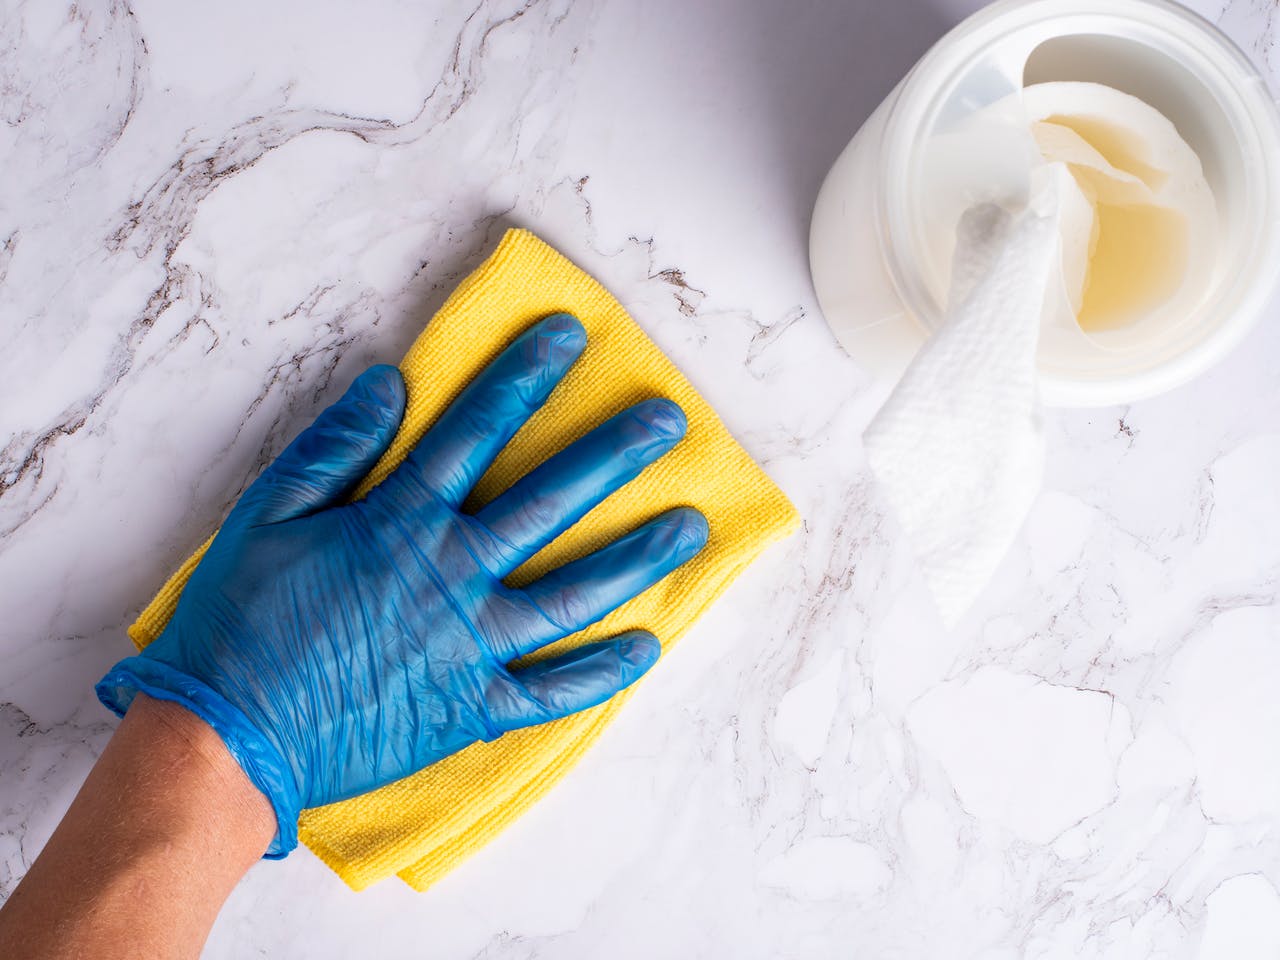 Preserving Elegance: The Essential Guide to Marble Restoration Best Practices